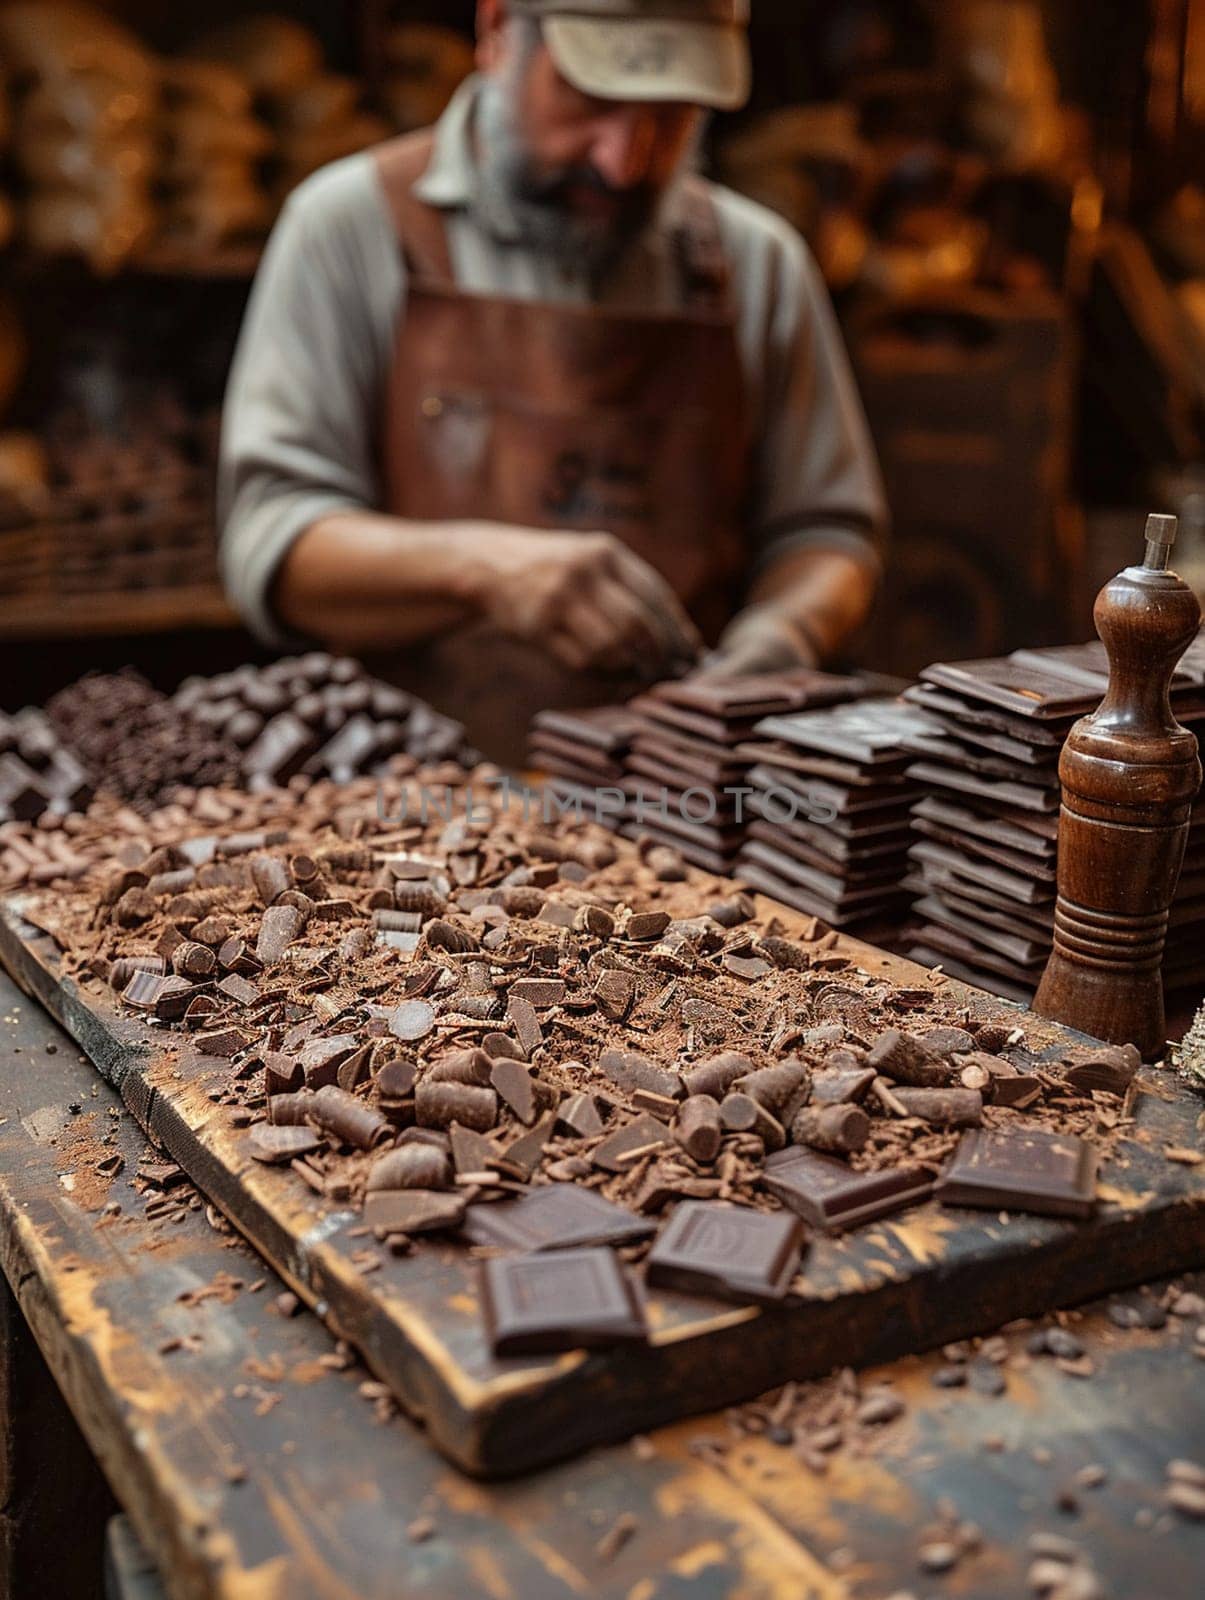 Rustic Chocolate Factory Workshop Amidst Sweet Aroma, Soft focus on artisan tools and chocolate pieces alludes to the craftsmanship in confectionery.